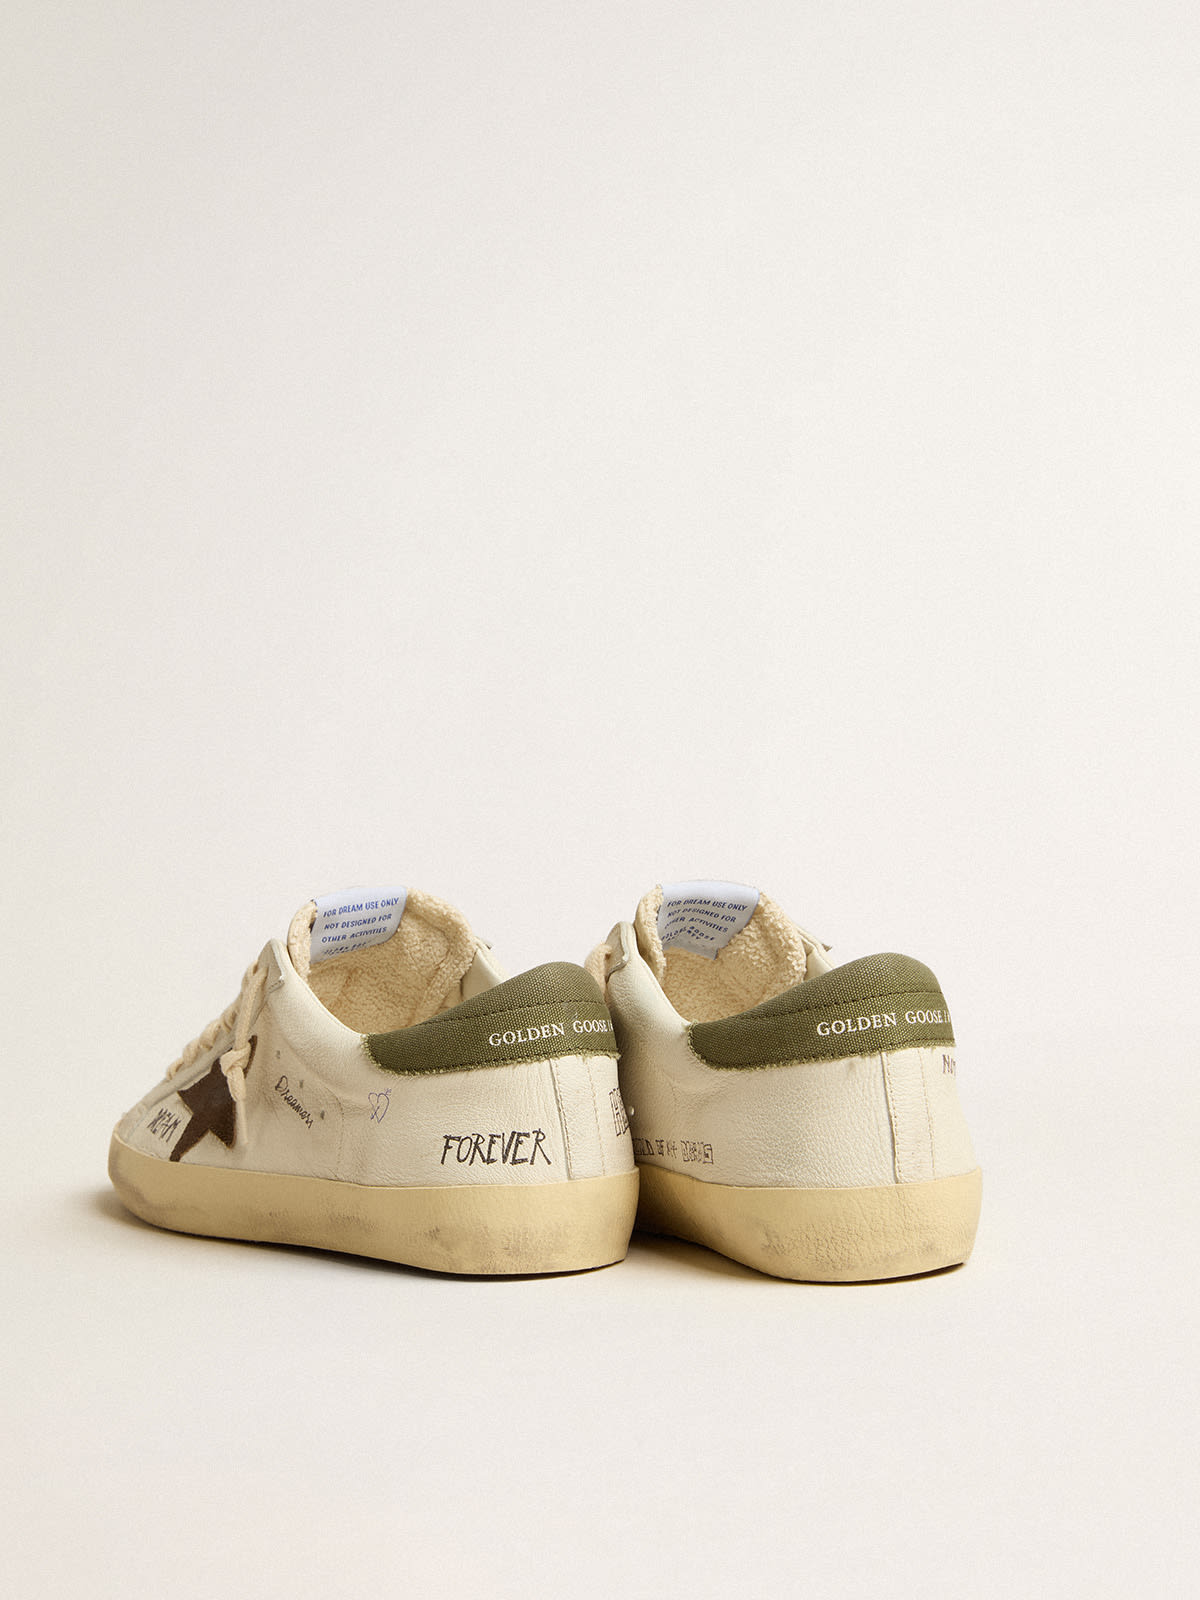 Golden Goose - Men's Super-Star LTD in nappa with brown suede star and green heel tab in 